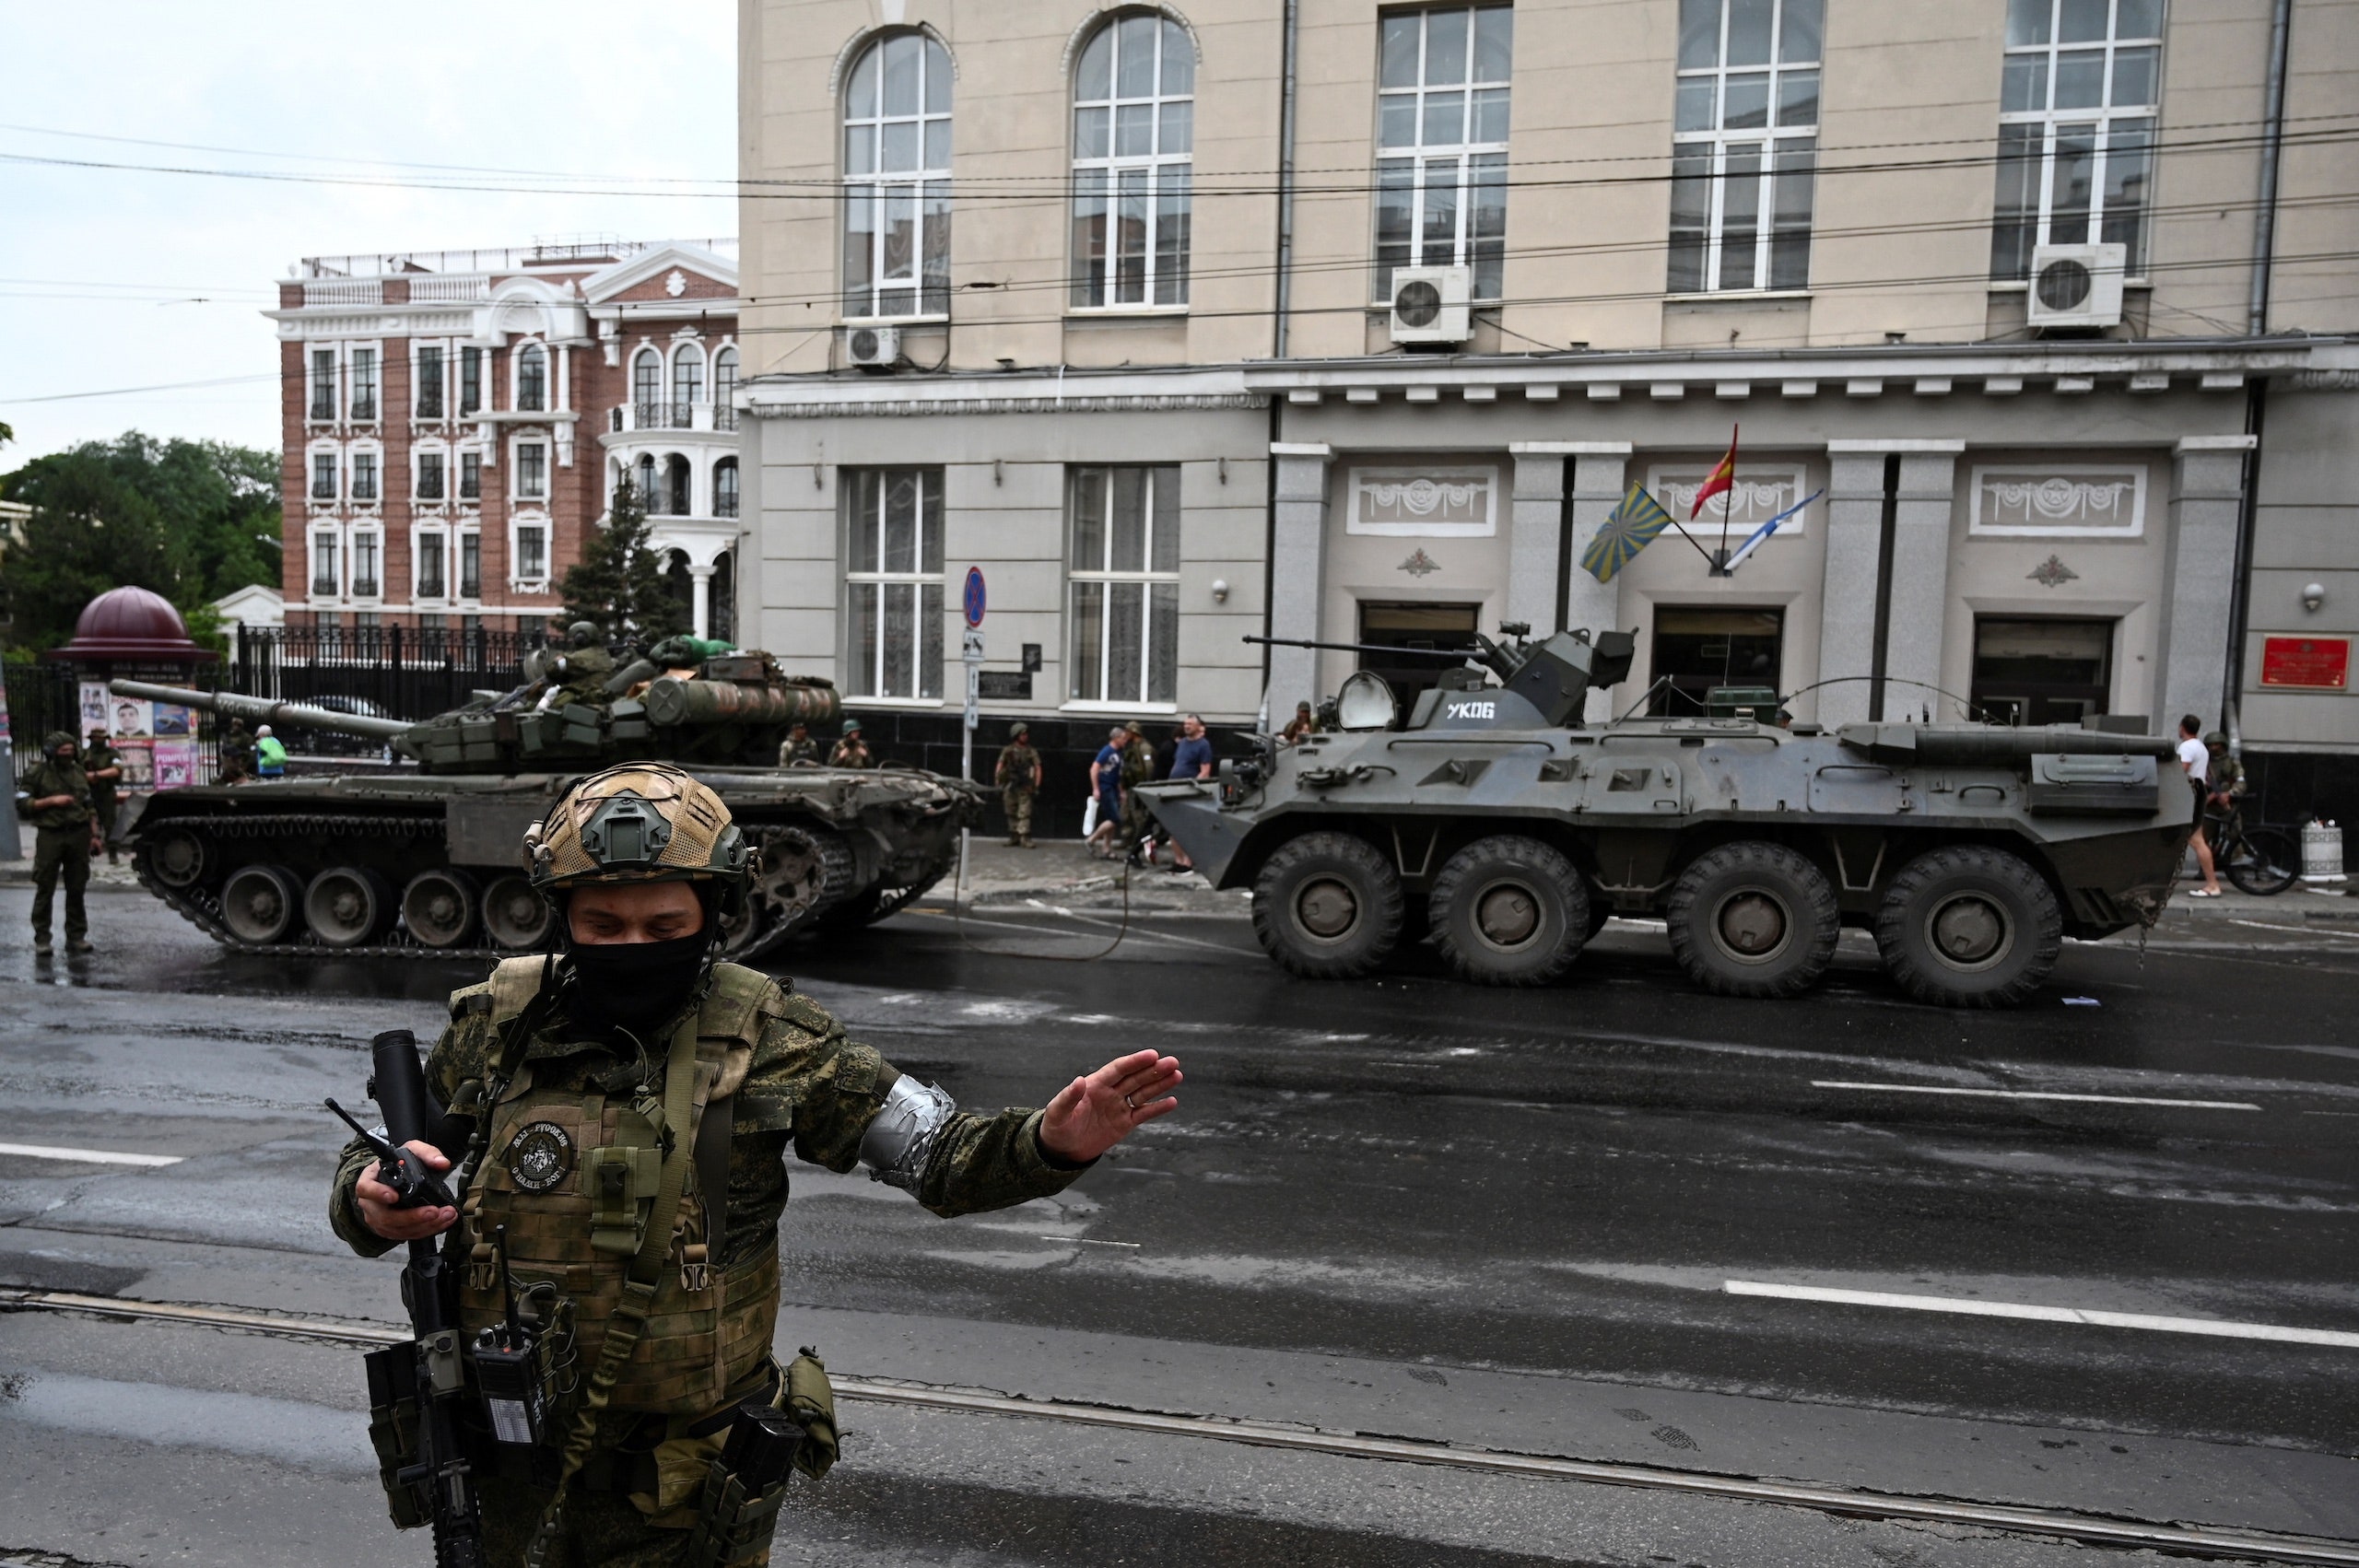 A fighter from the Wagner Group in military fatigues stands before two tanks in the streets of RostovonDon Russia.